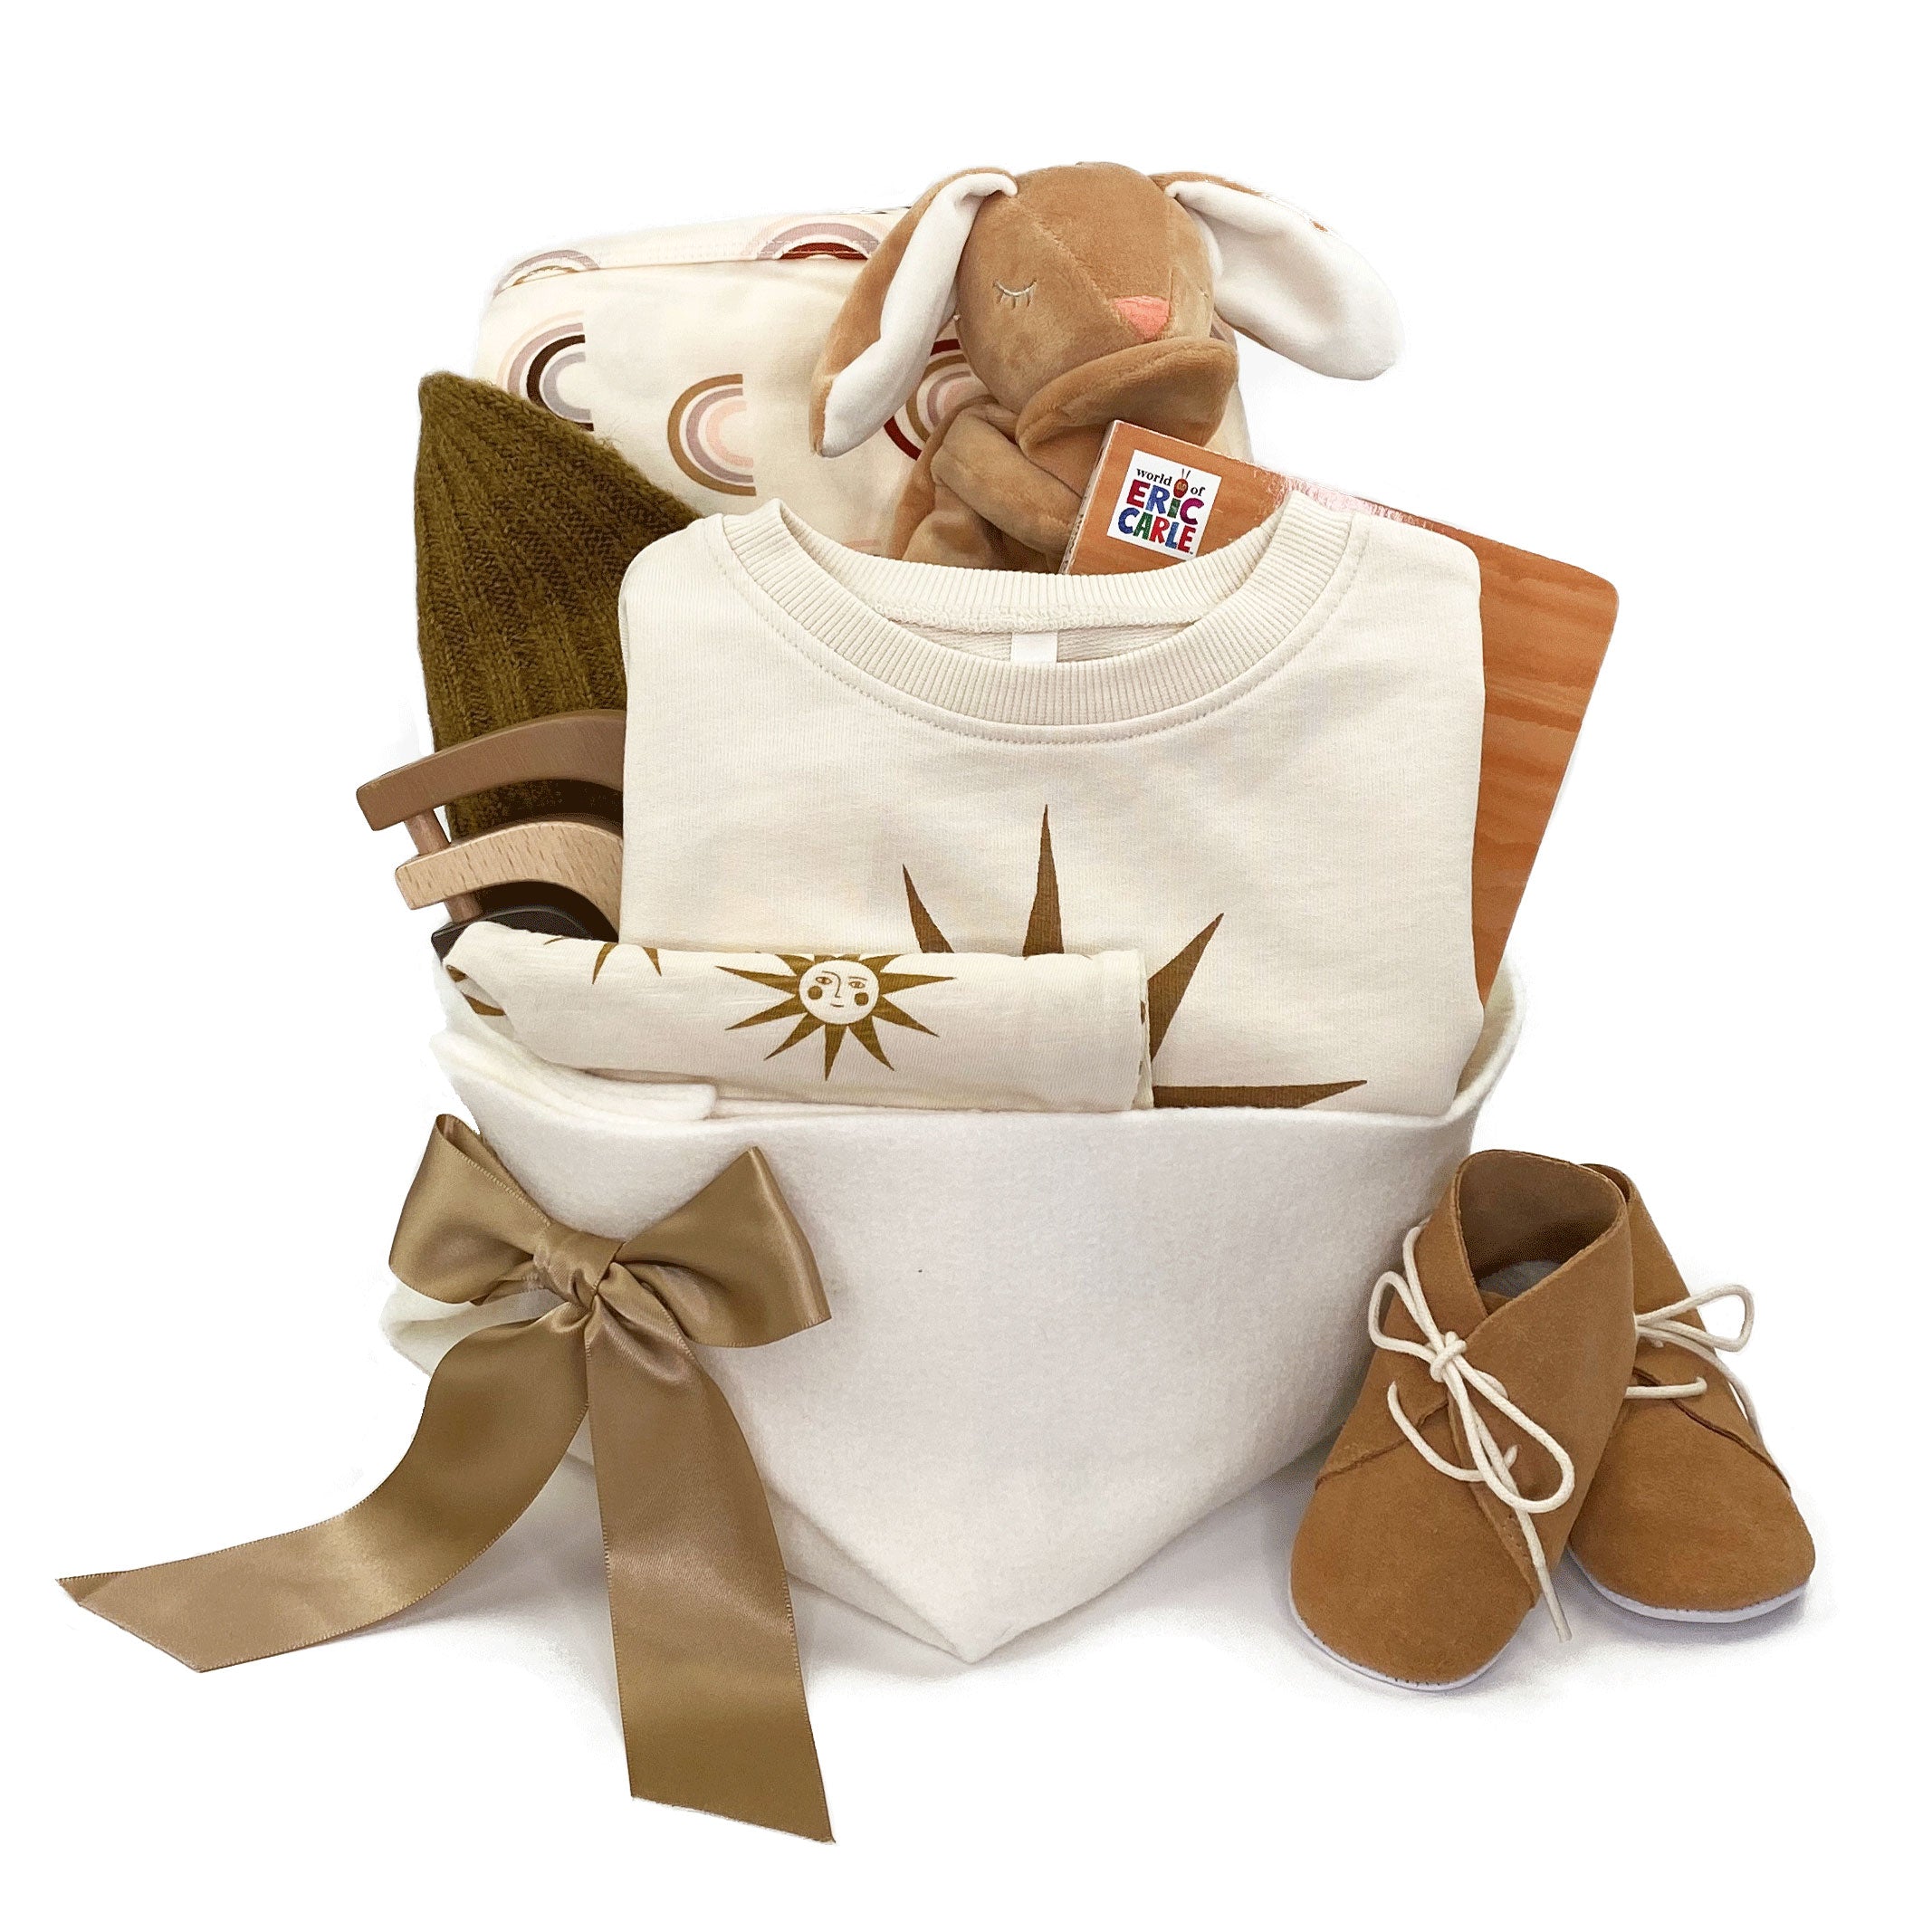 Luxury Baby Gift Basket featuring Rylee and Cru at Bonjour Baby Baskets